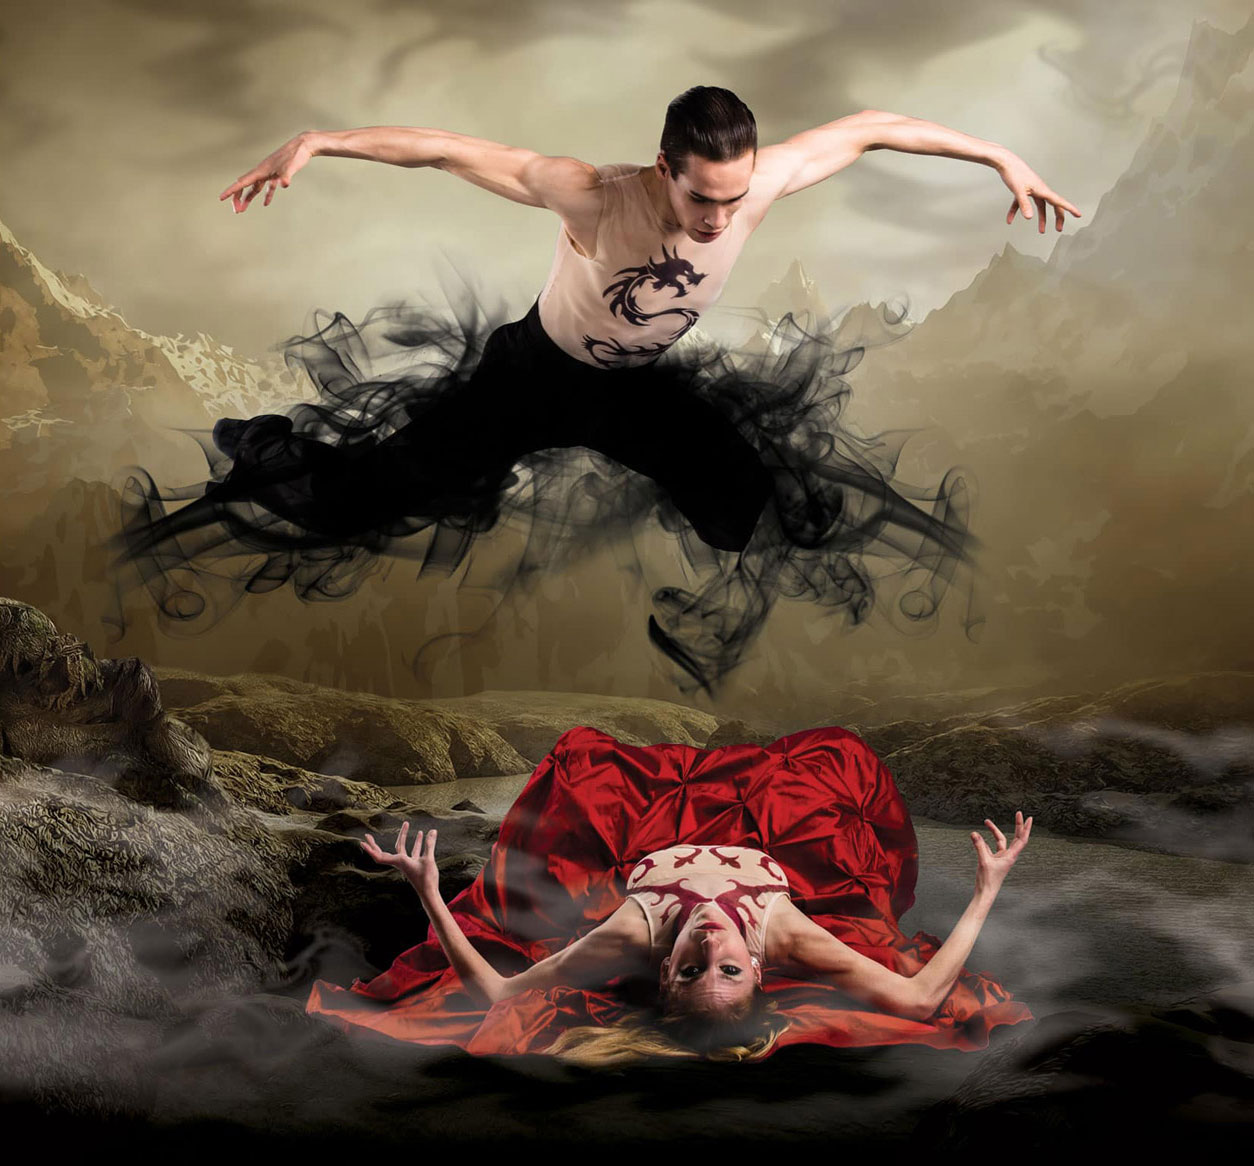 After image: Image of a scene from Dracula, showing a vampire in the process of transformation into black smoke, hovering over a woman lying on the ground in a red dress. The surrounding mist adds to the eerie atmosphere of the image.